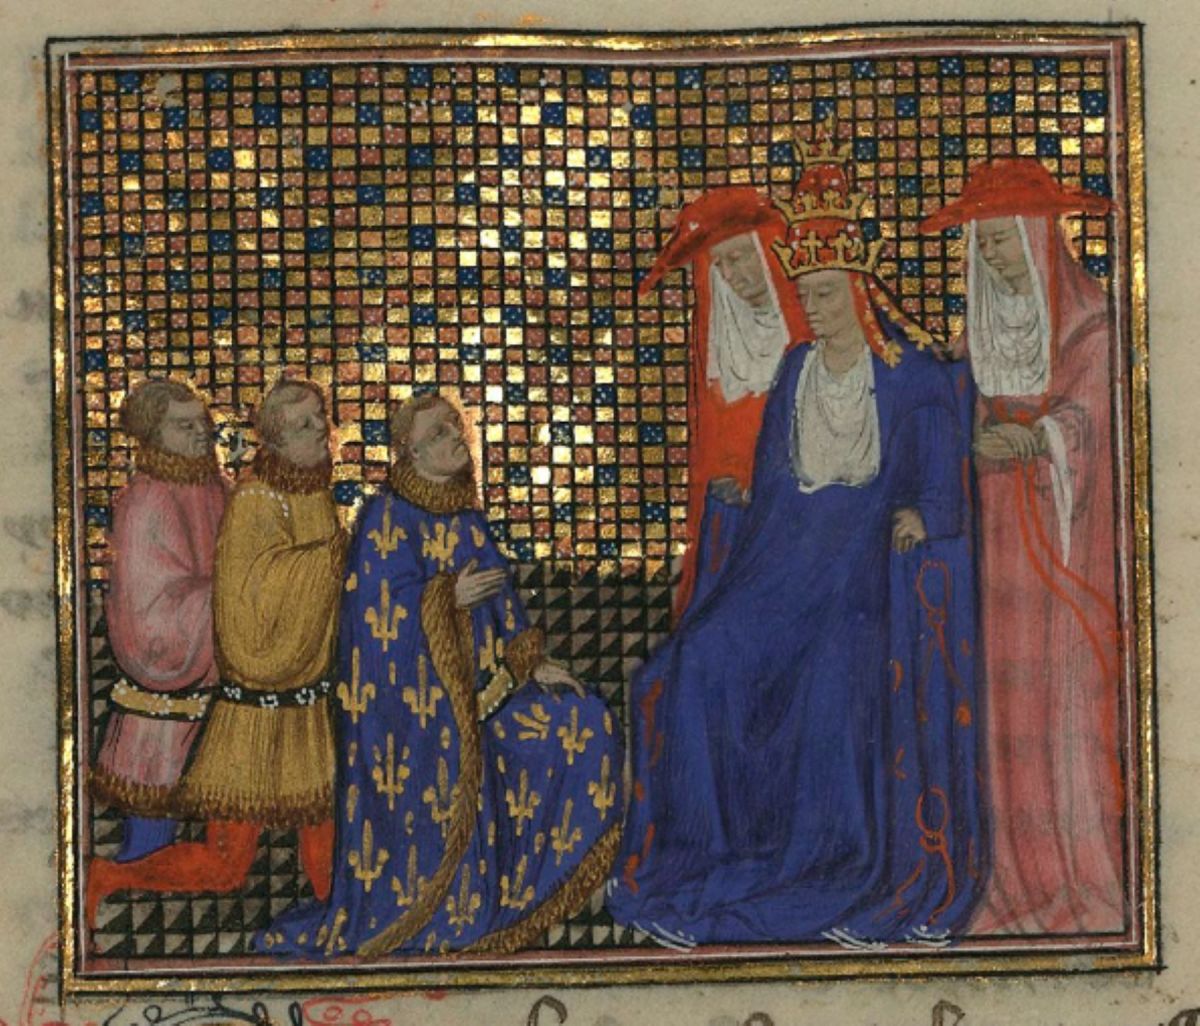 Pope/Antipope Clement VII, right and seated. The Duke of Anjou in blue and gold is having an audience with the Avignon based pope.